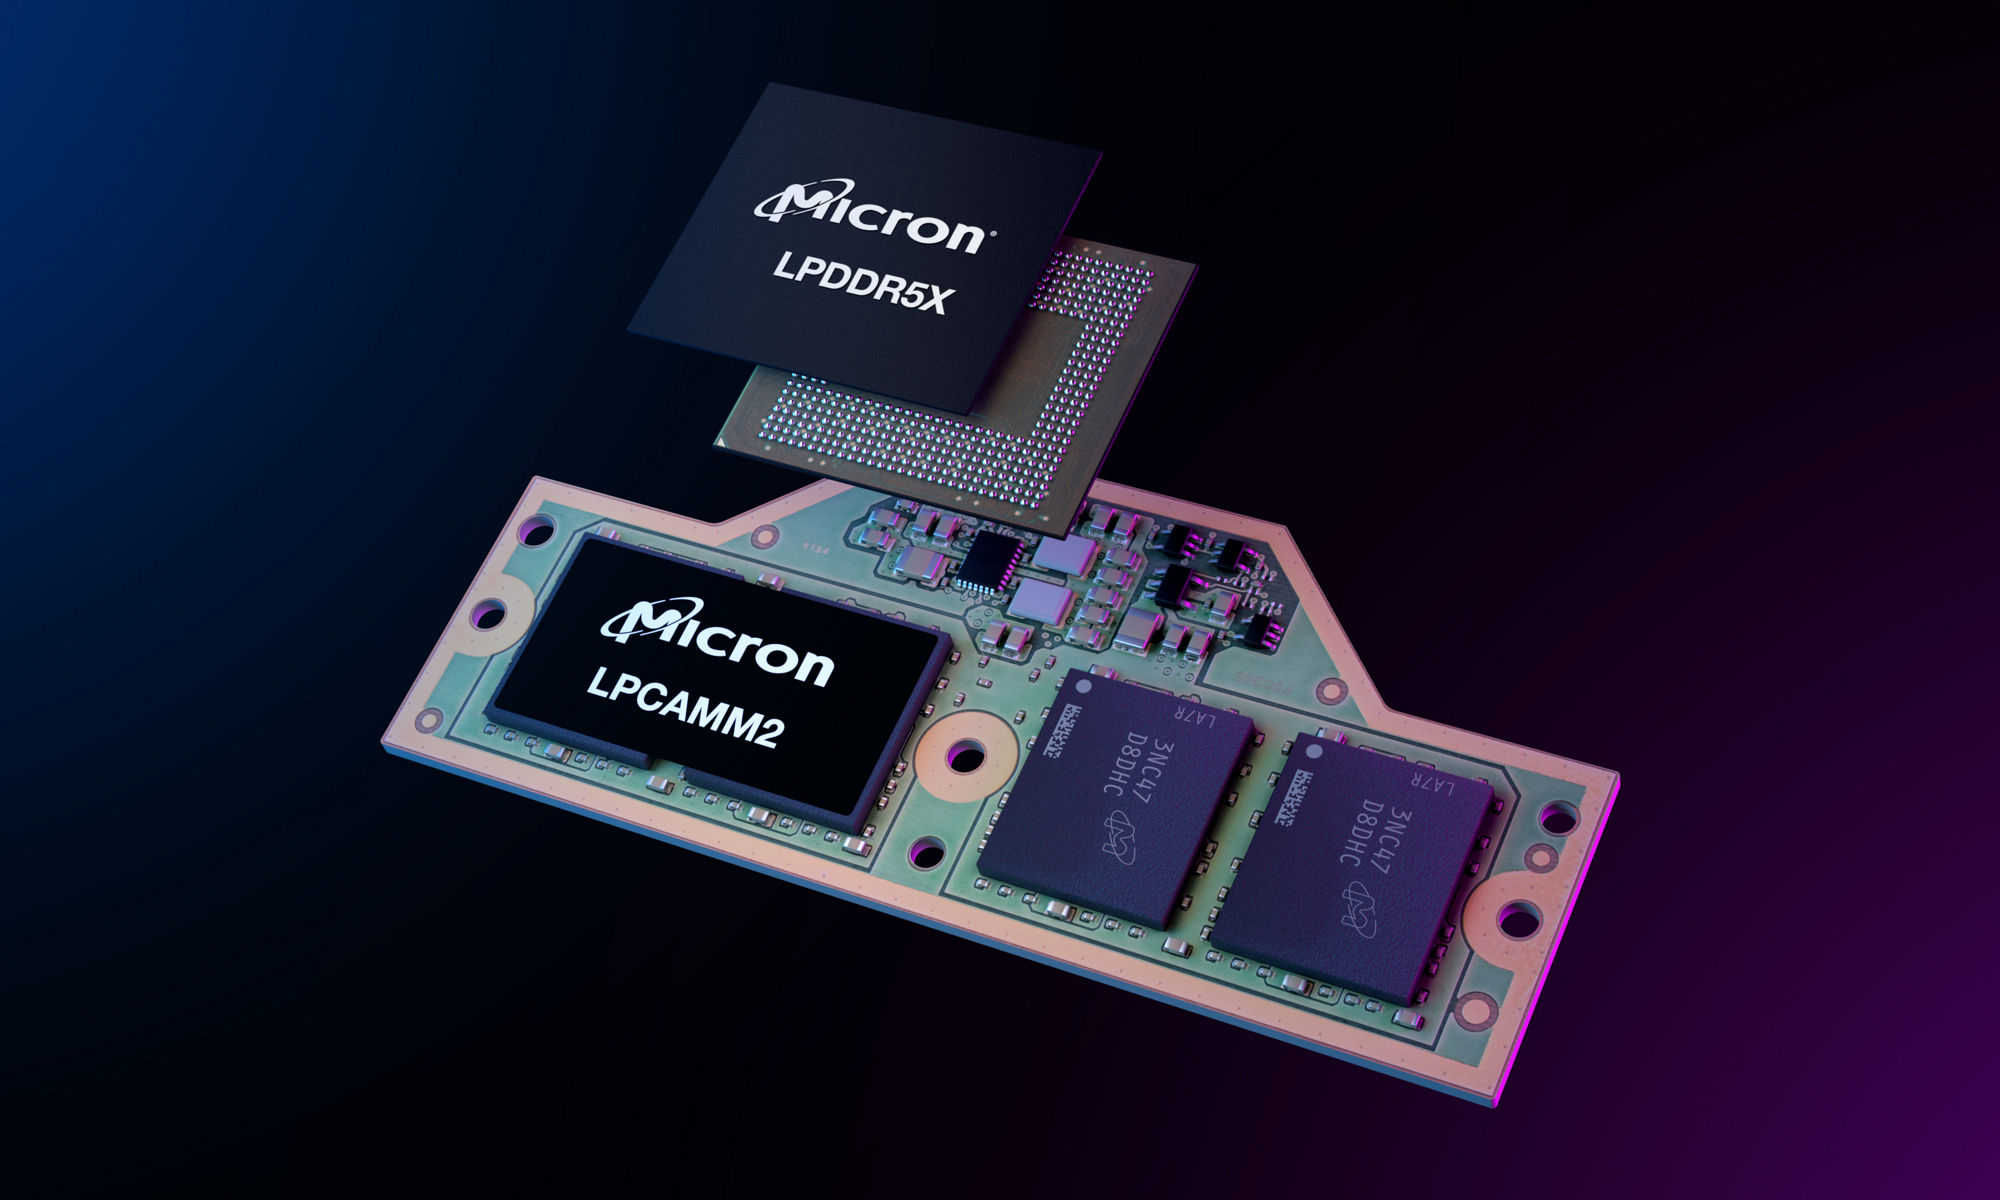 Micron LPDDR5X and LPCAMM2 components